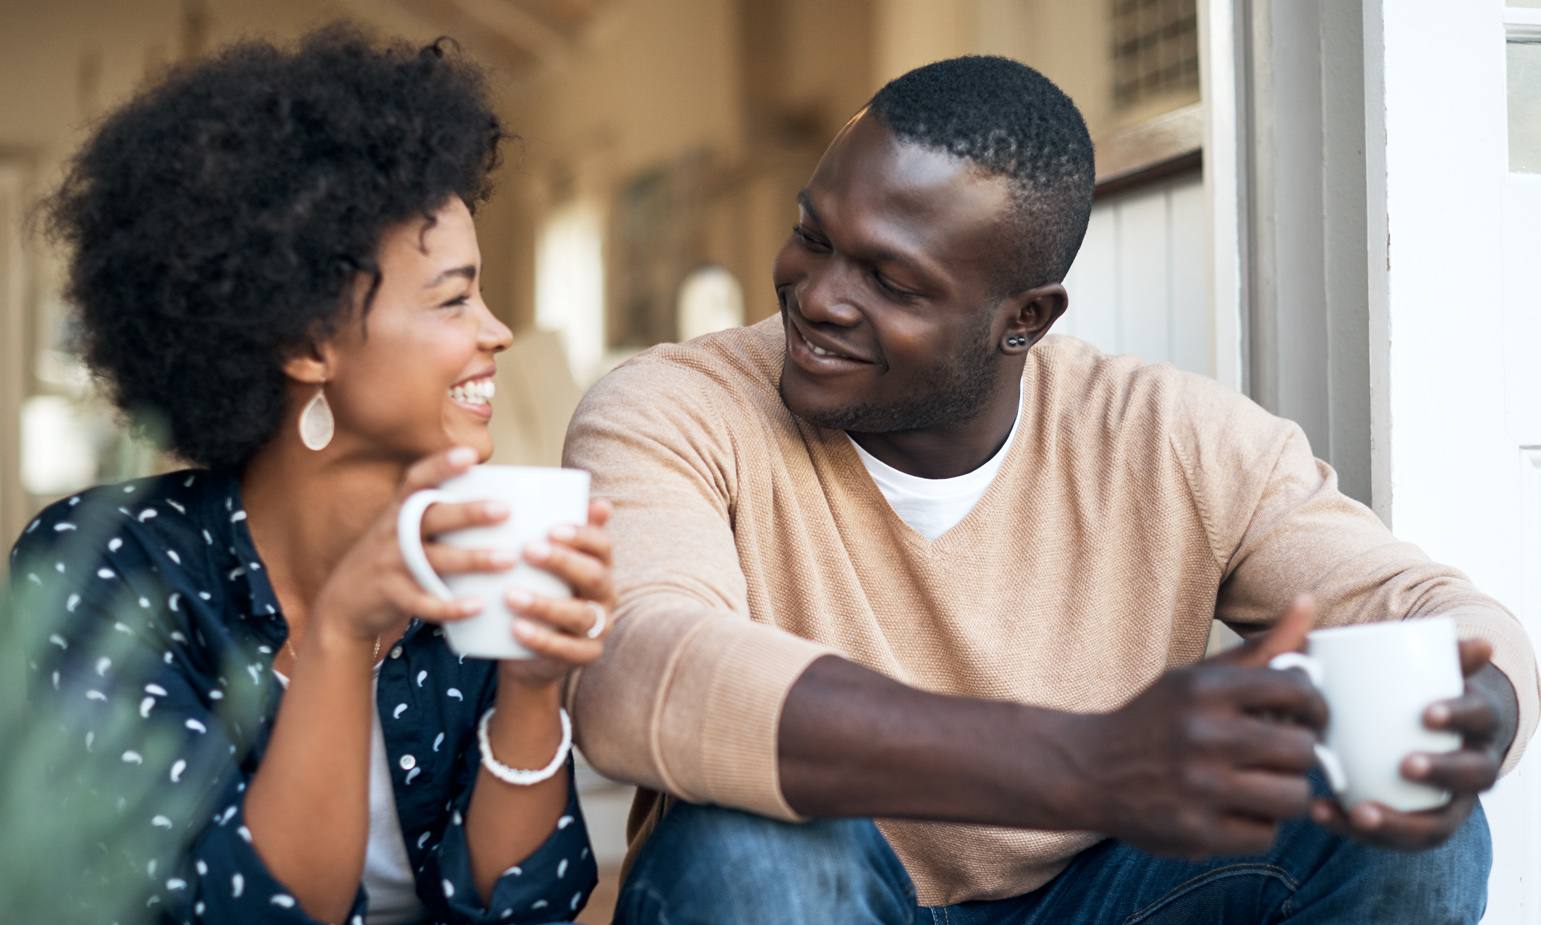 Young woman and man sitting side-by-side on stoop, coffee mugs in hand, looking at each other, smiling